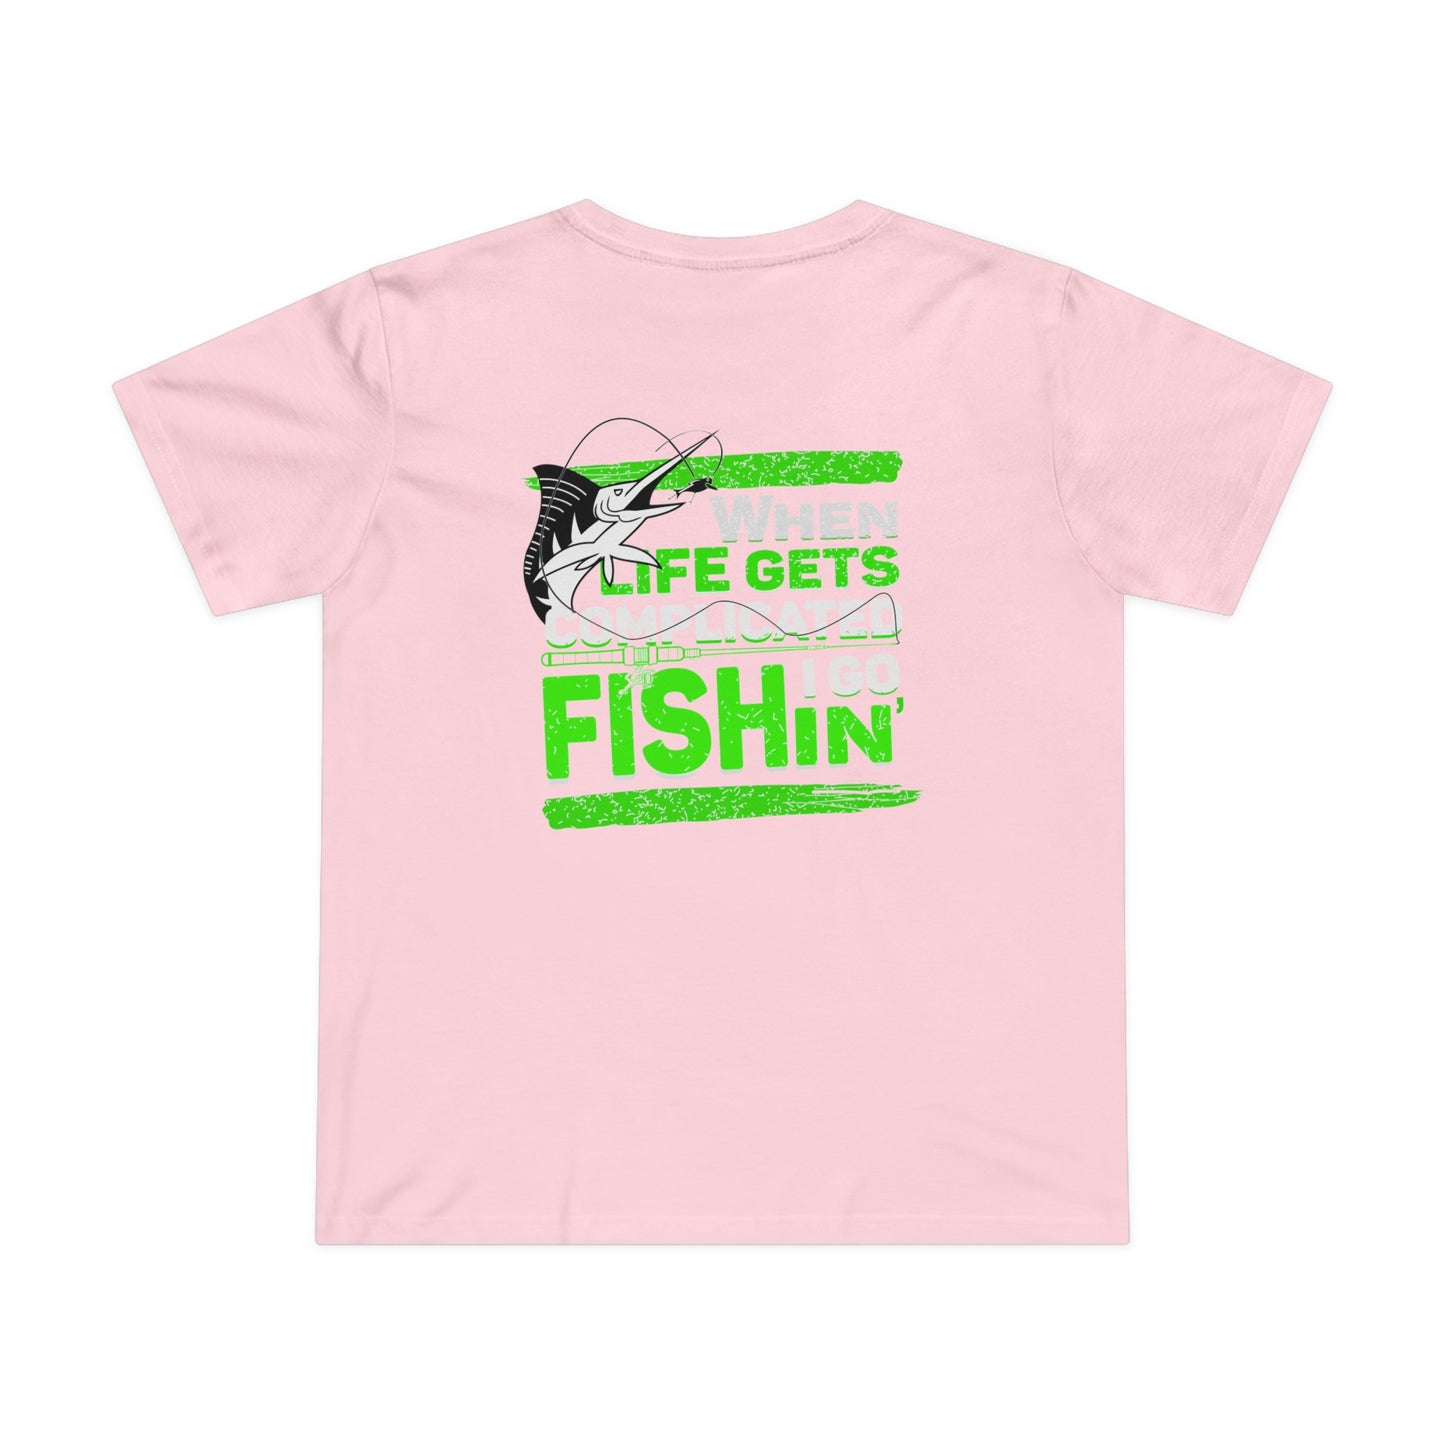 Women’s Maple Tee - When Life Gets Complicated I Go Fishin